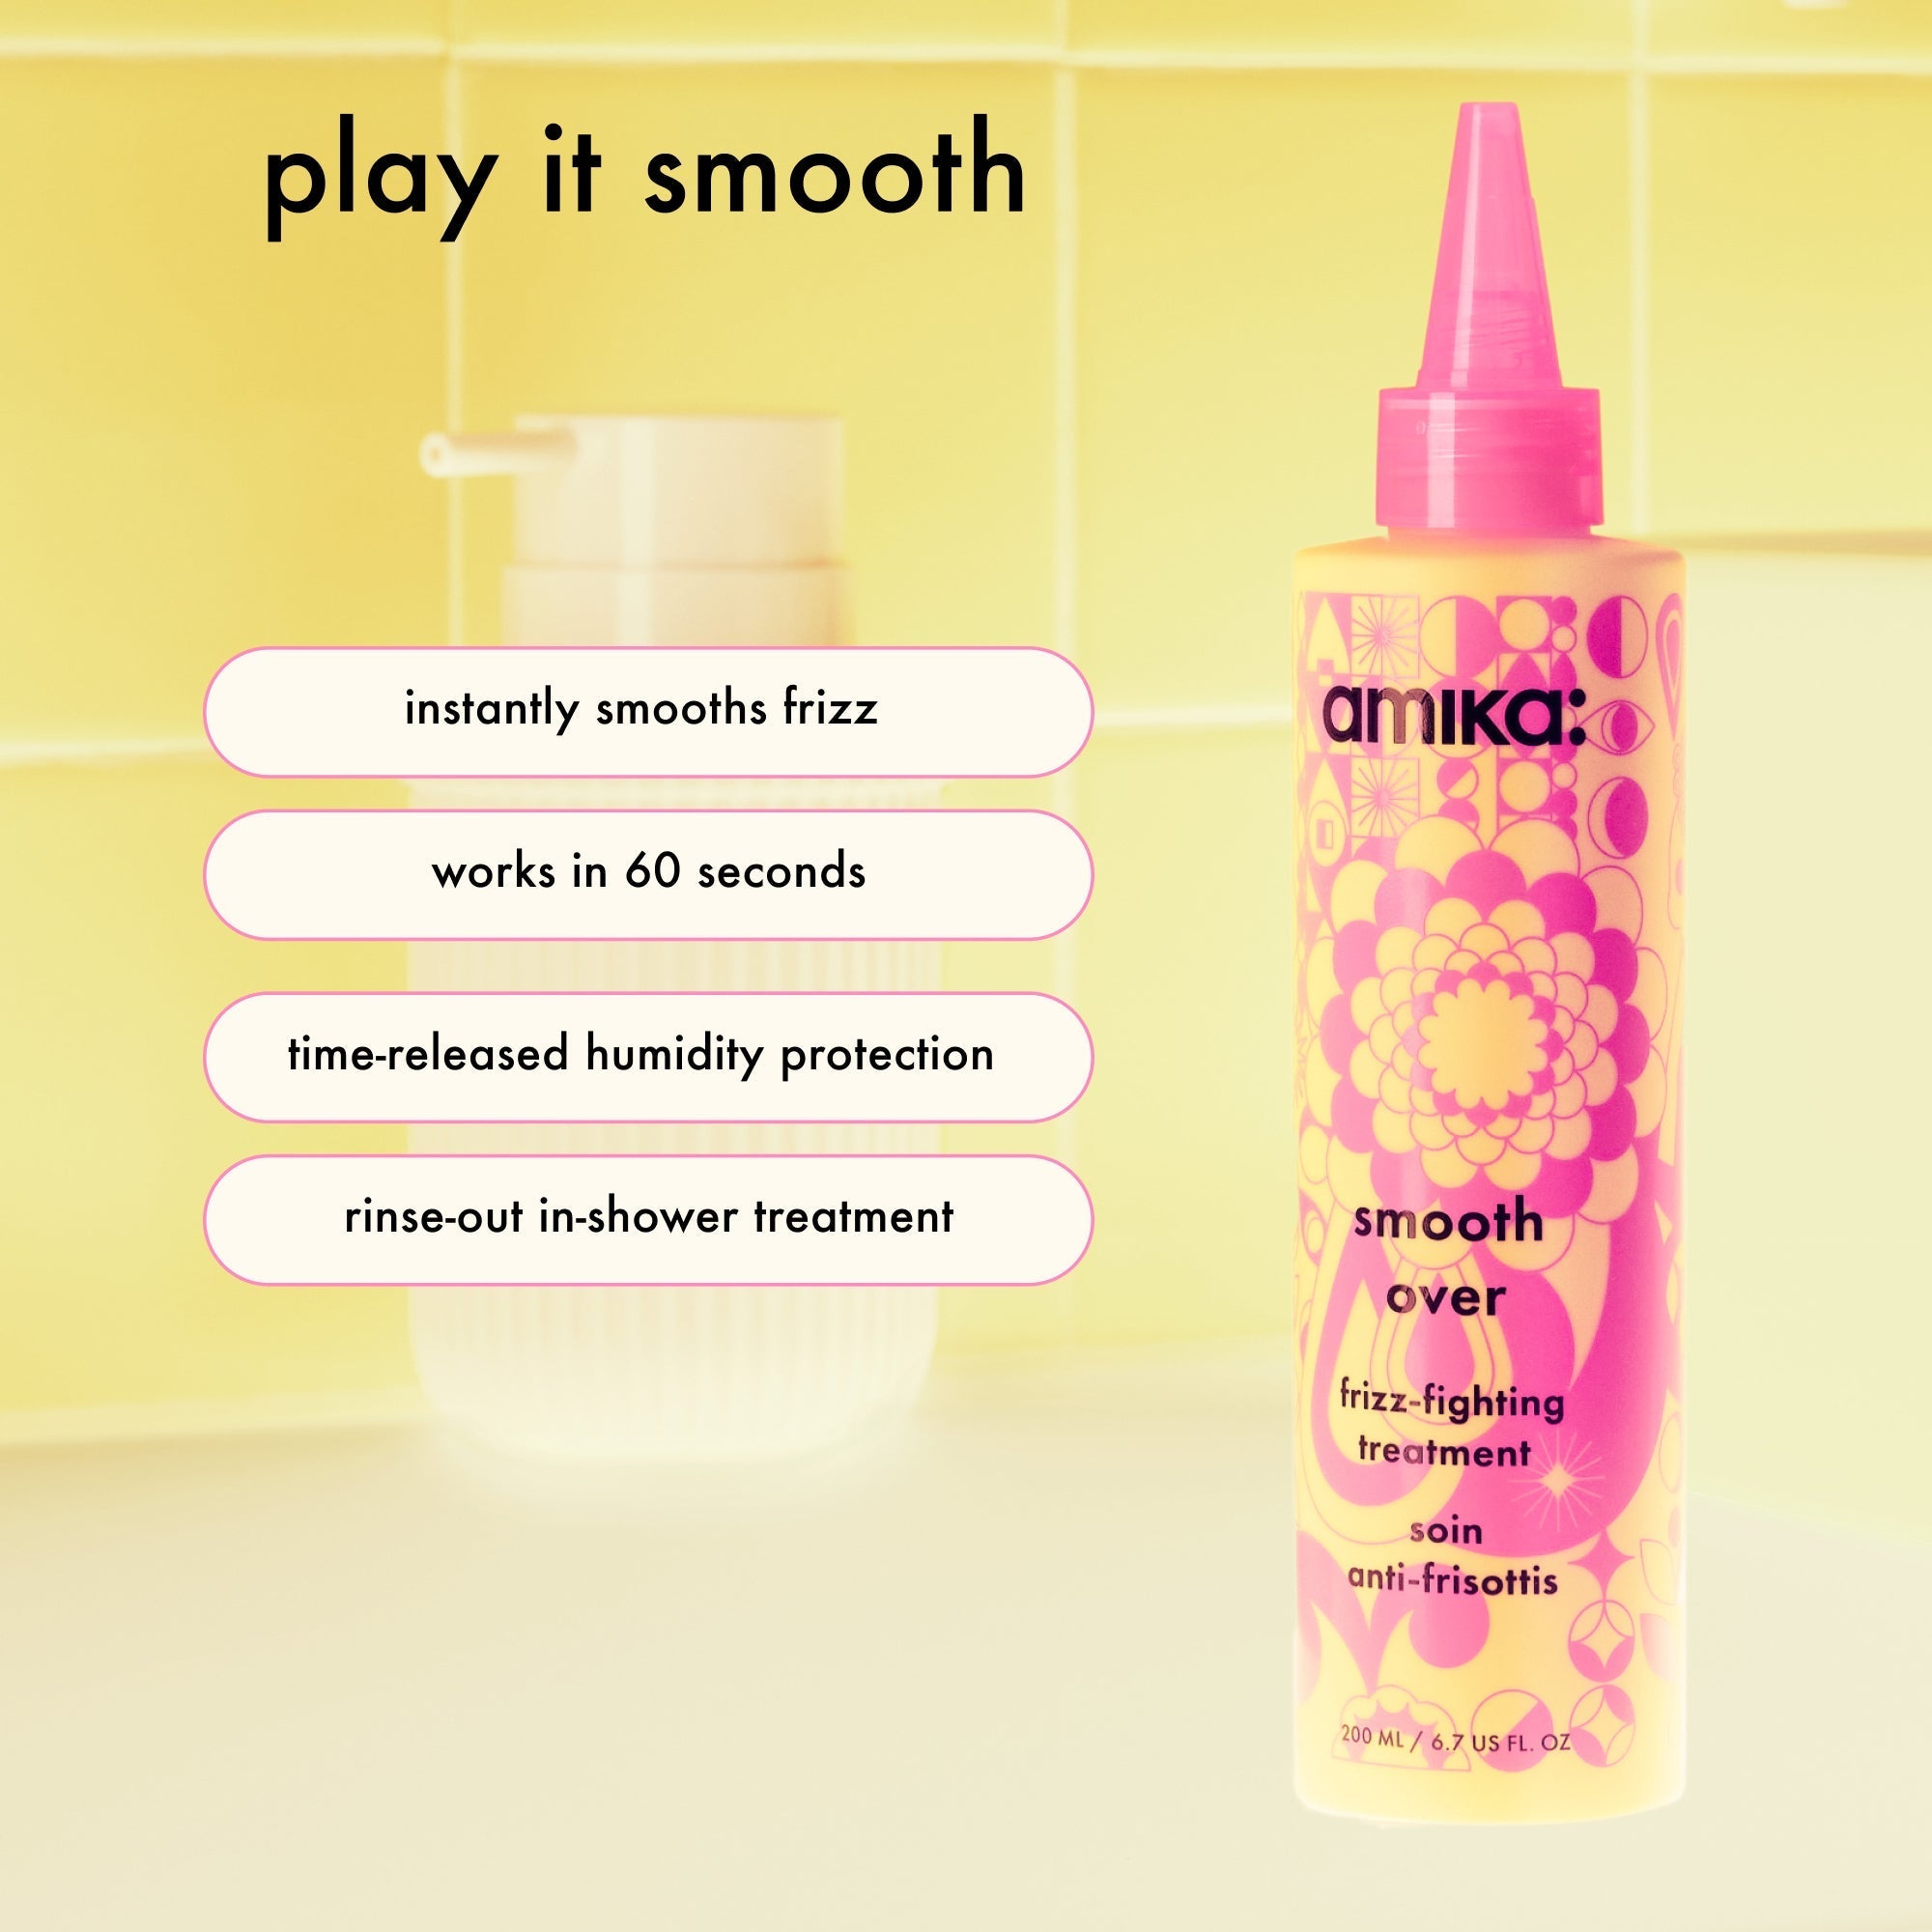 Amika Smooth Over Frizz-Fighting Treatment / 6.7OZ